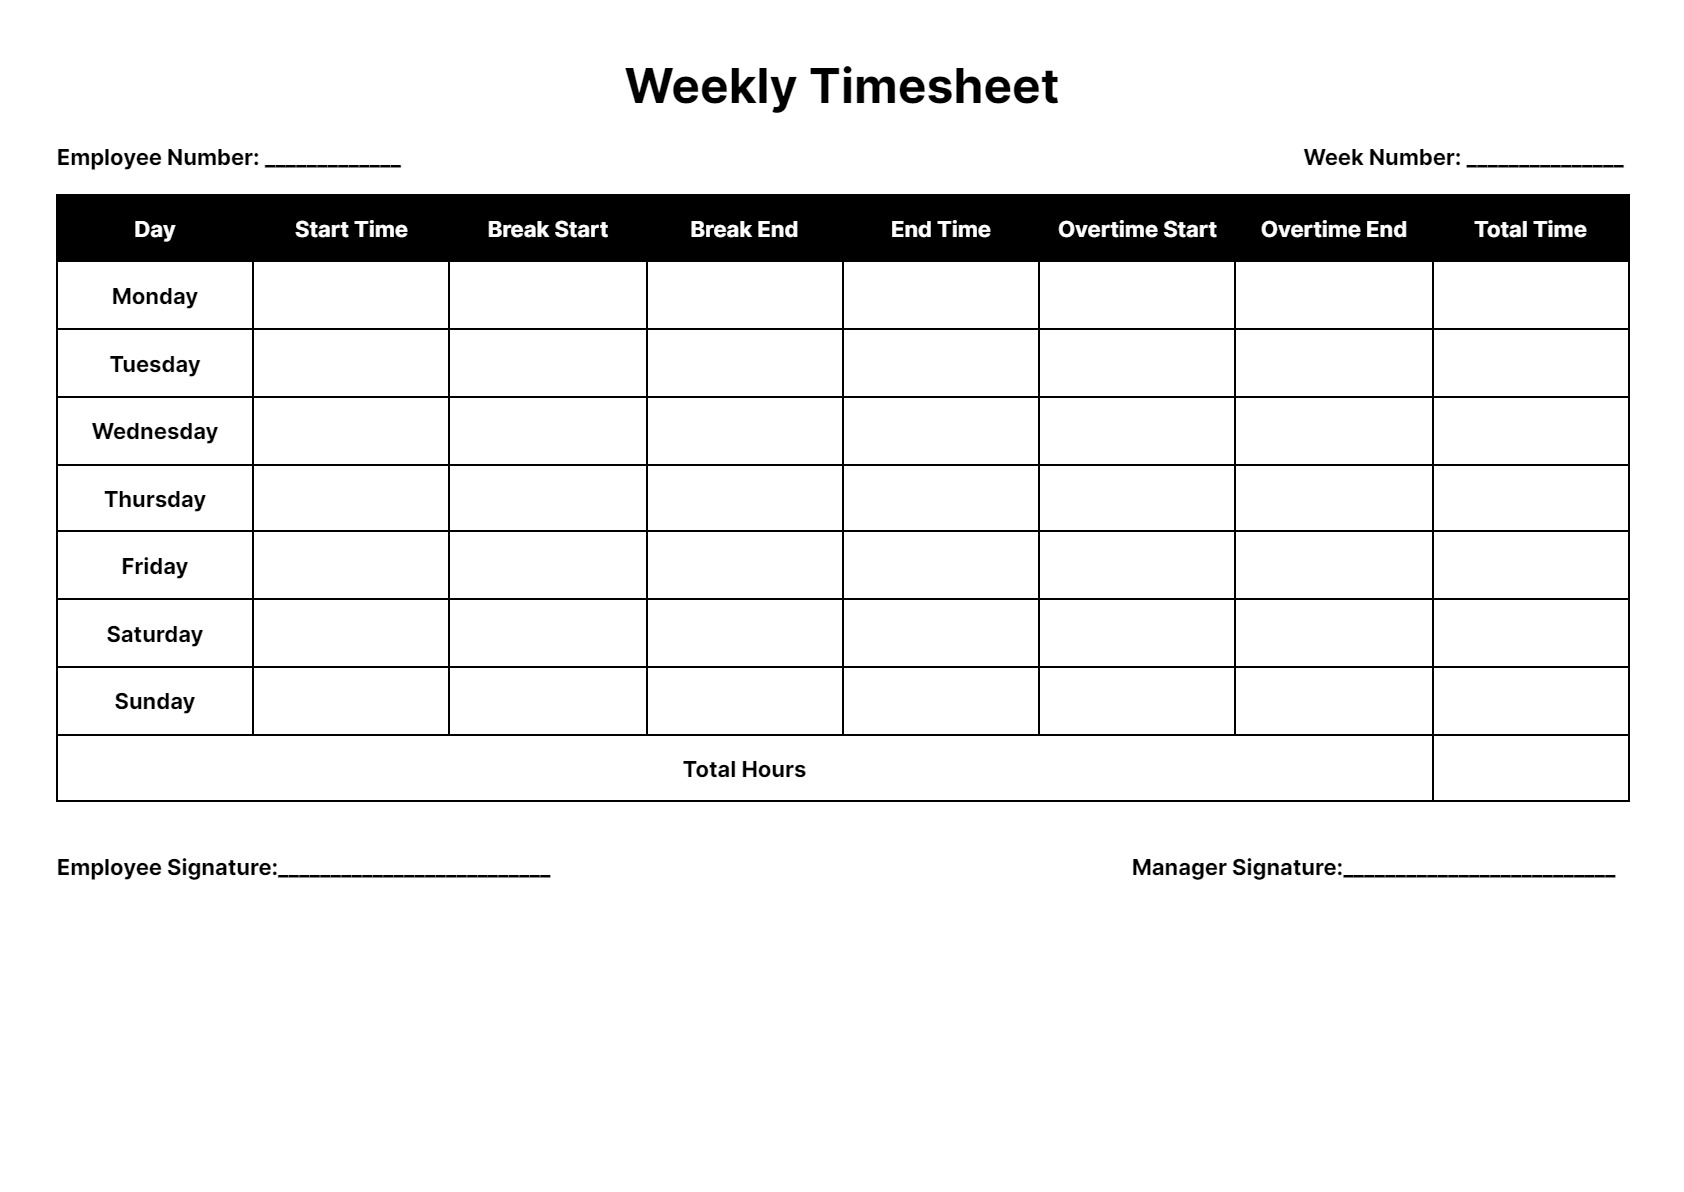 Weekly Timesheet Template Excel Free Download